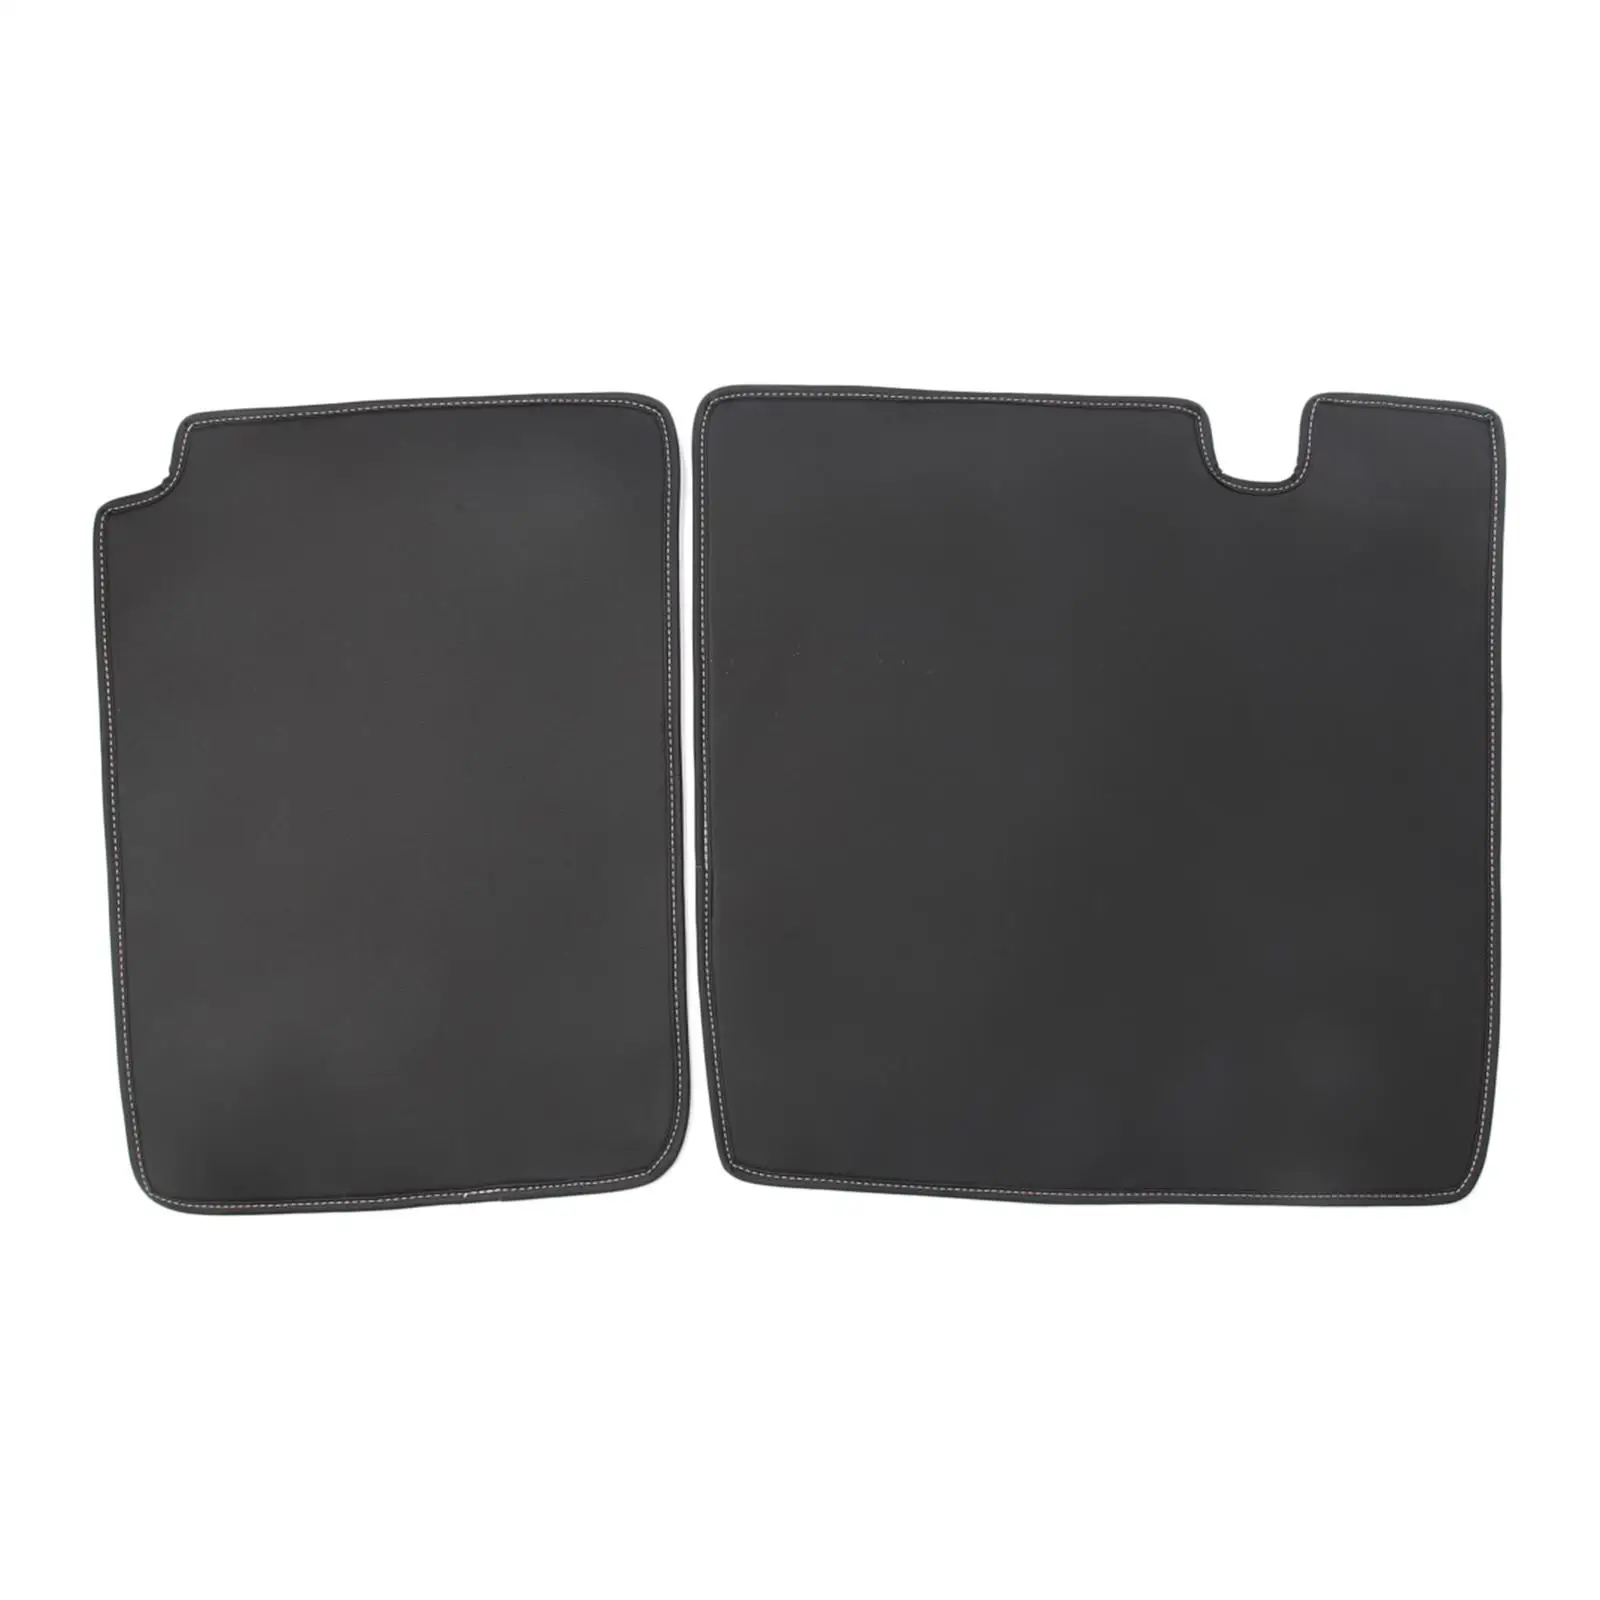 2x Car Rear Seat Pad Trunk Back Backrest Protective Cushions for Tesla Model 3 Model Y Seats Back Cover Clean Mat Pad Black